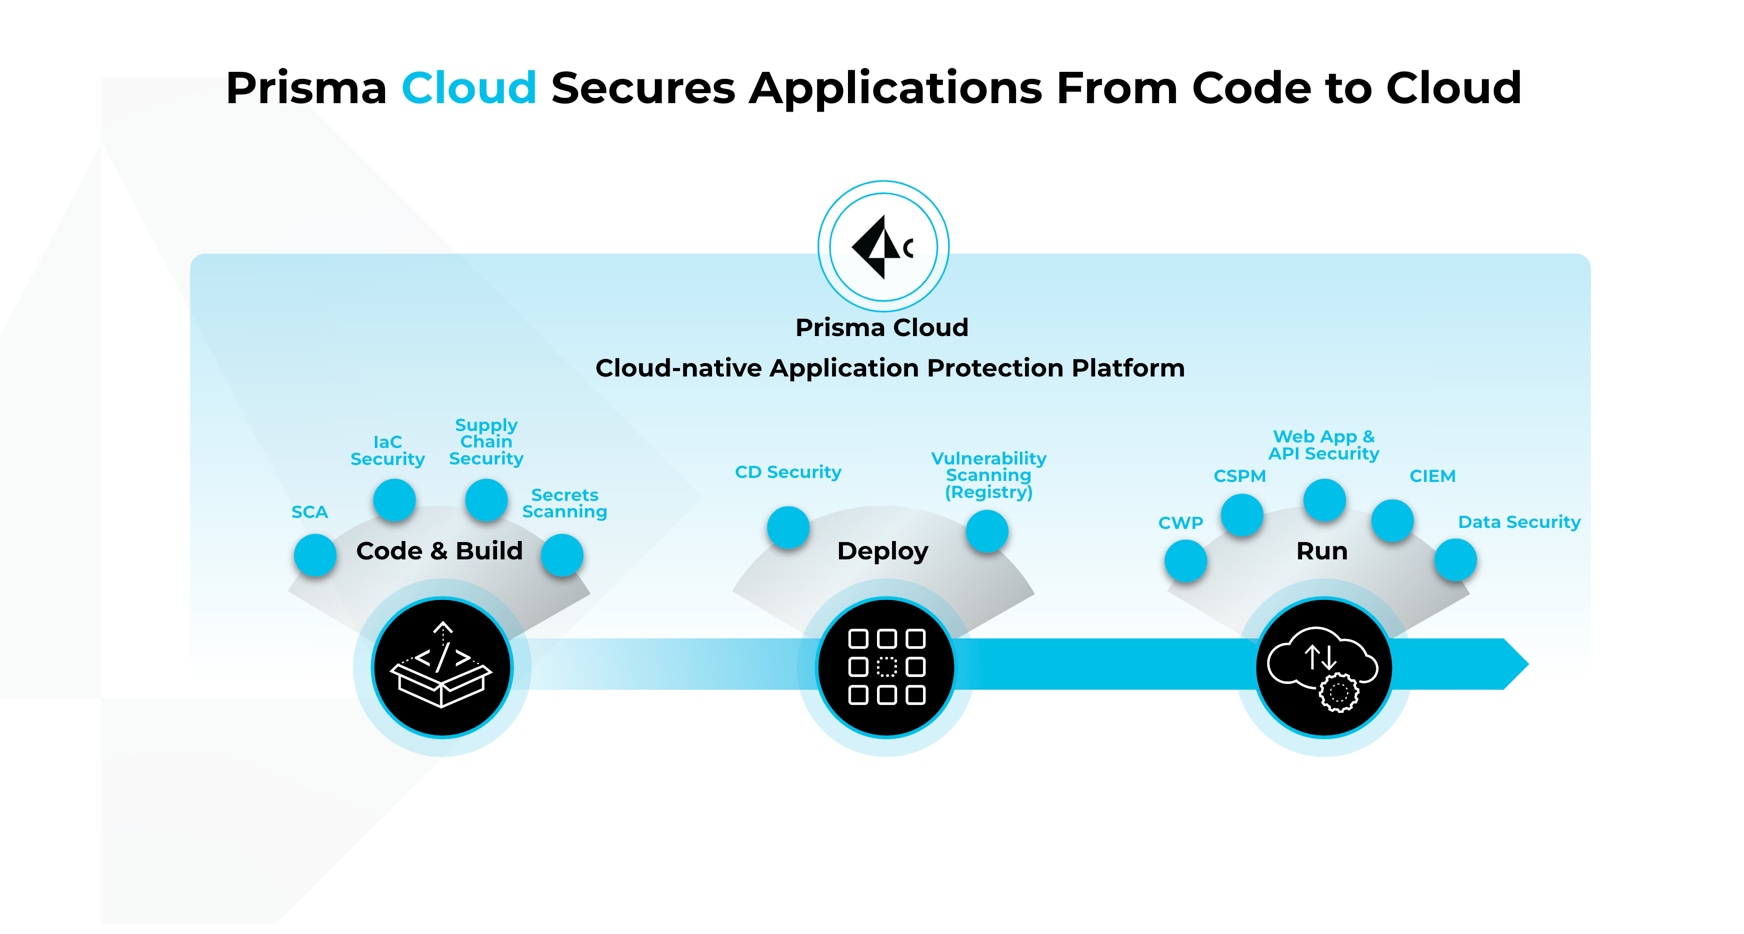 Prisma Cloud secures applications from code to cloud. Cloud-native application protection platform.